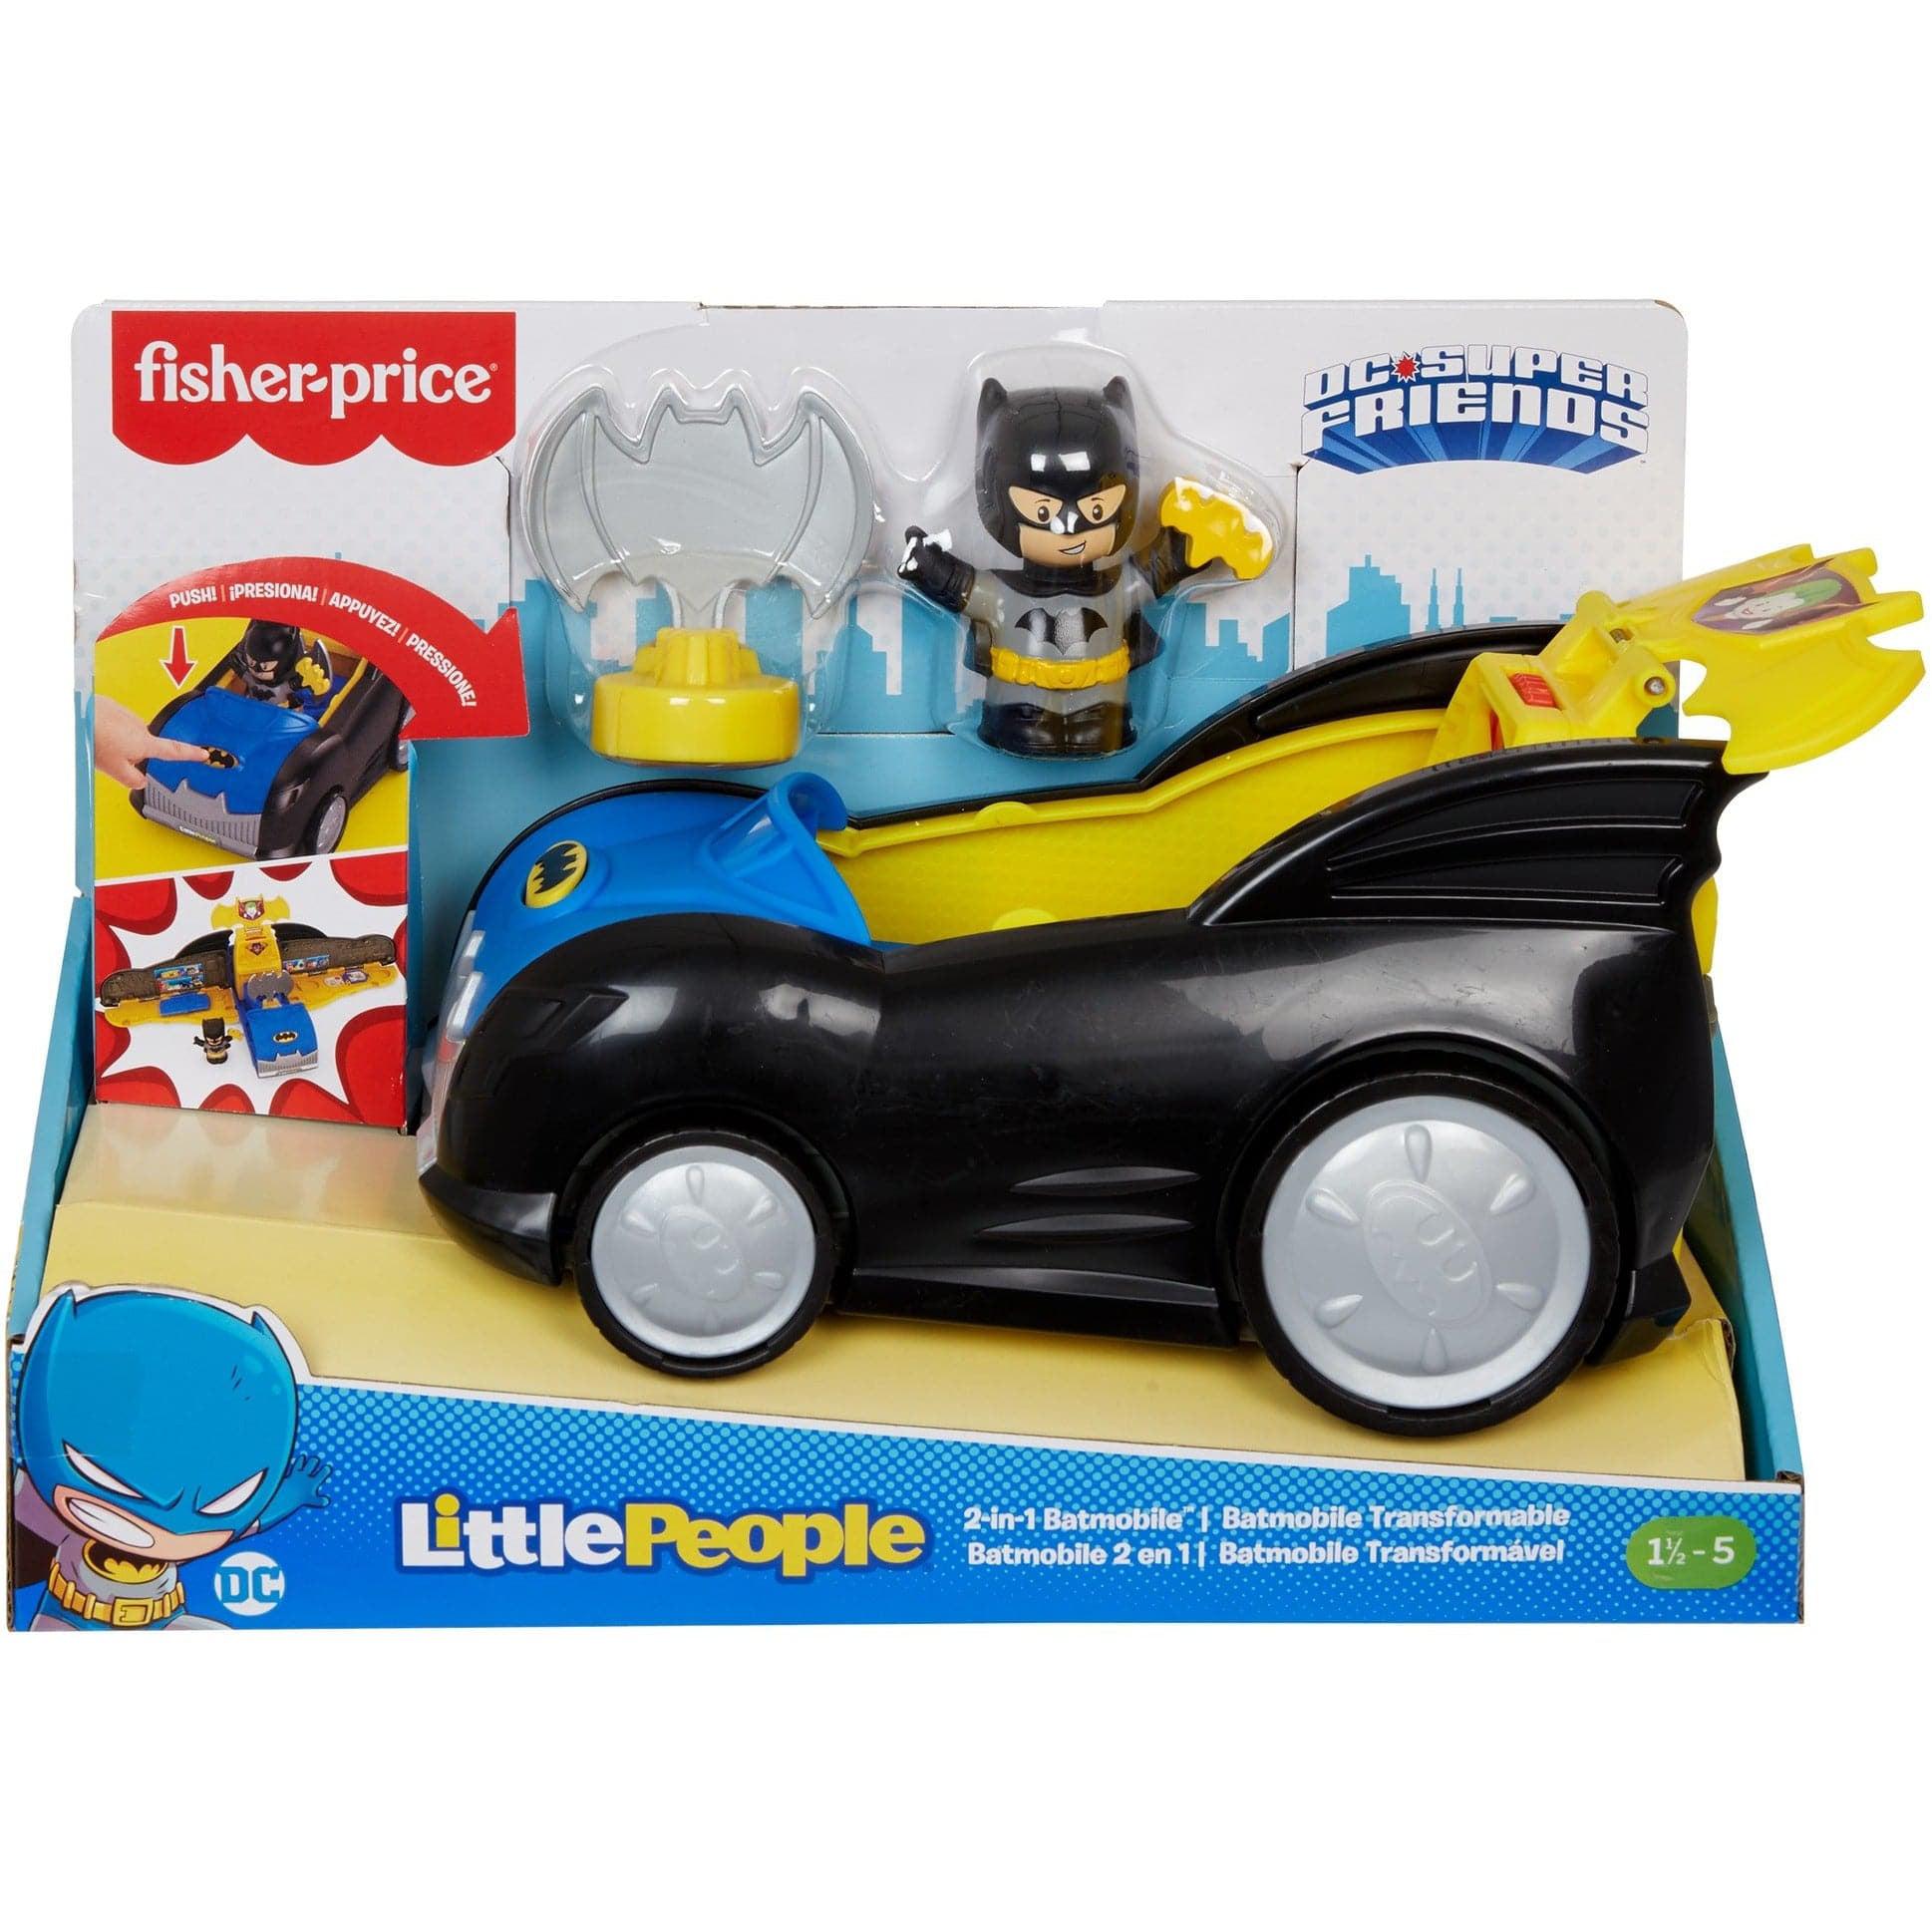 Fisher Price-Fisher-Price Little People - DC Super Friends 2-in-1 Batmobile-GMJ15-Legacy Toys